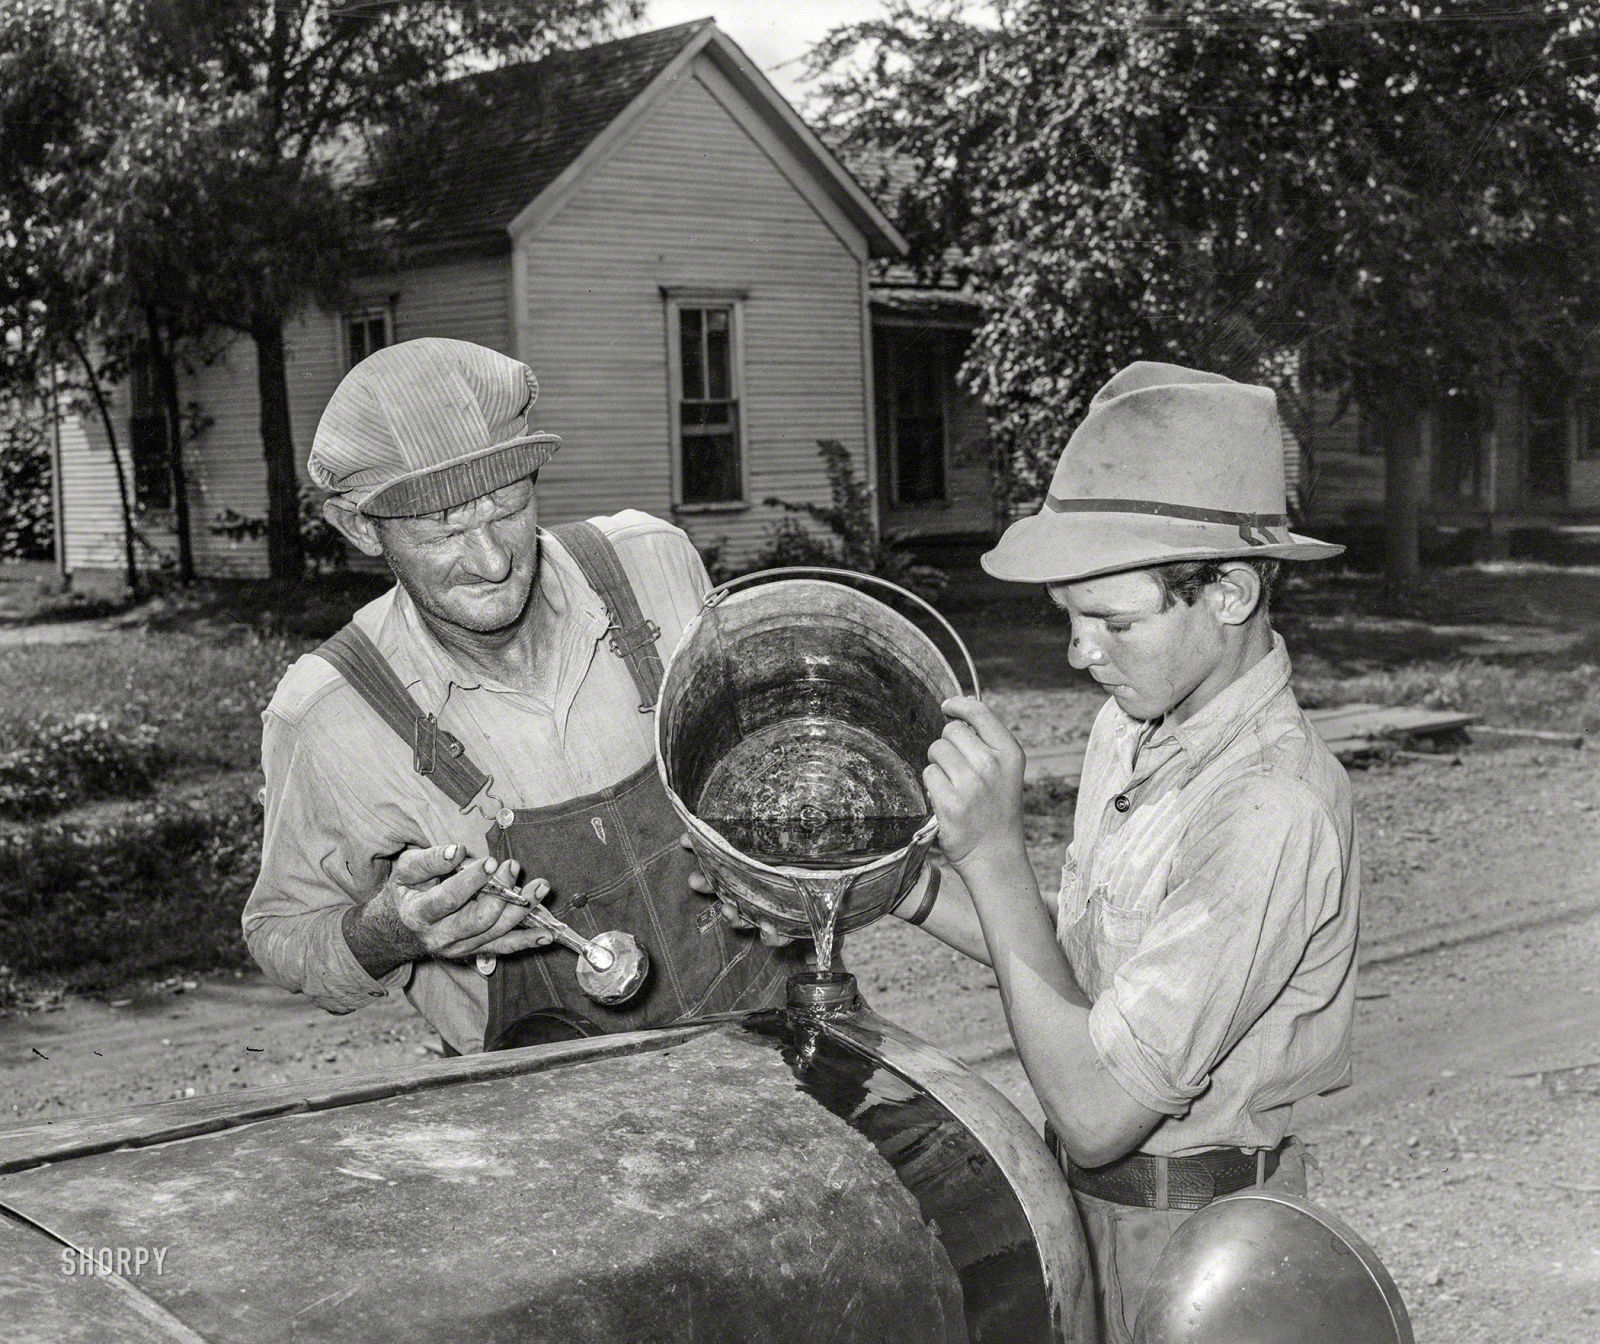 Elmer Thomas and his son top off the radiator before setting out. (Shorpy)